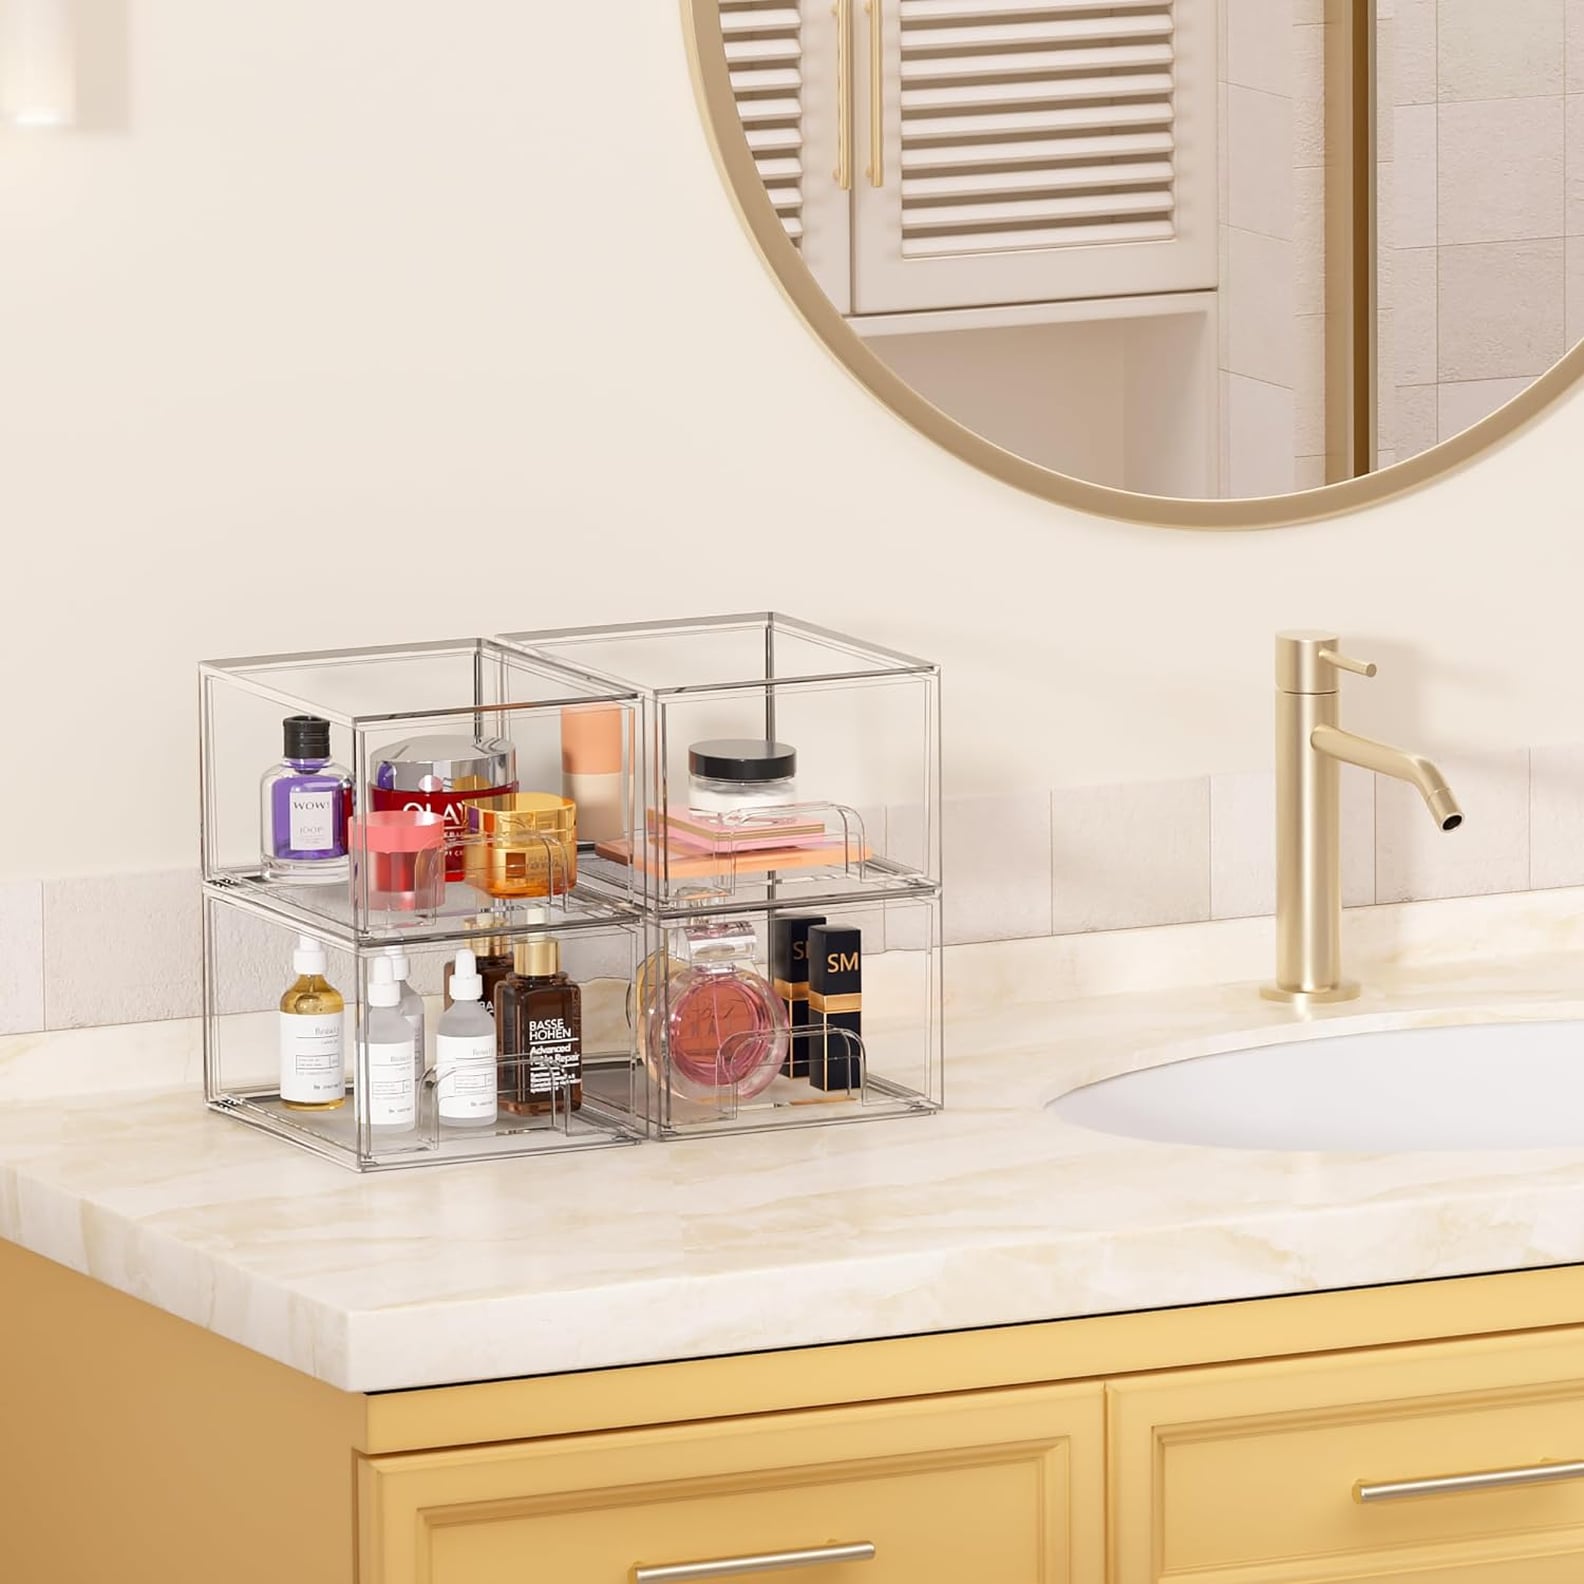 Best Makeup and Jewelry Organizers to Clean Up Your Vanity | POPSUGAR Home